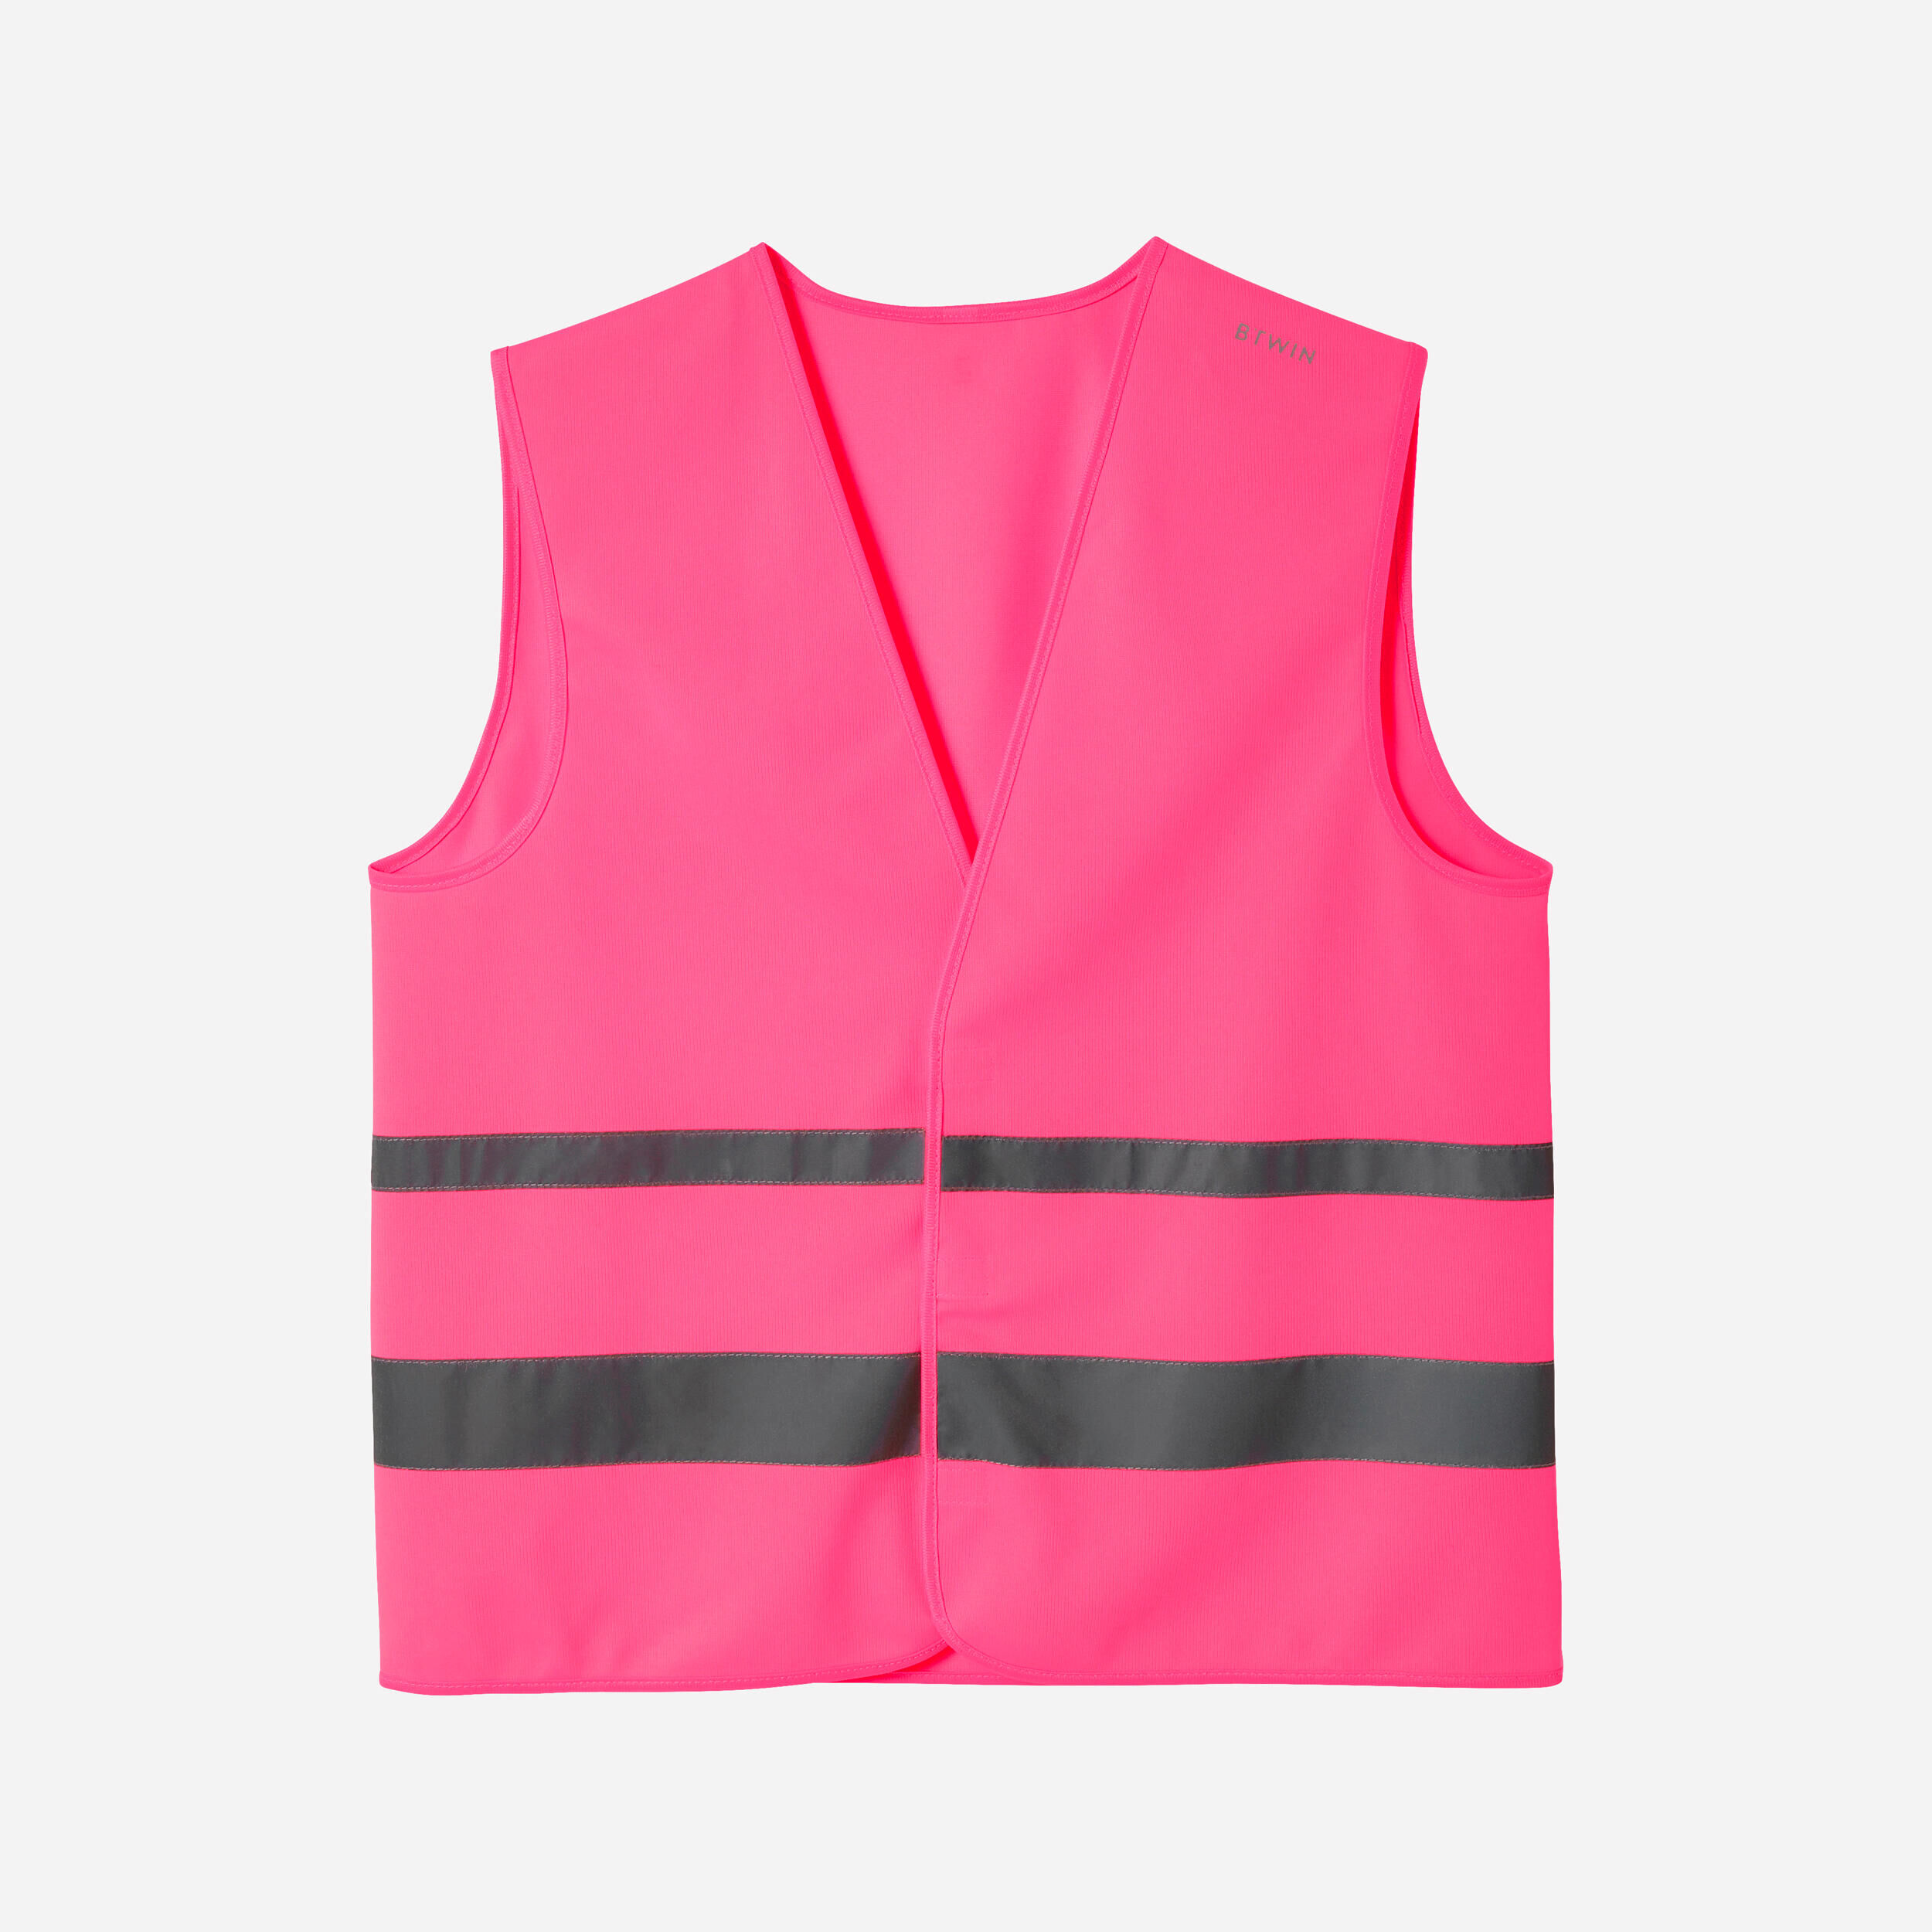 BTWIN Adult High Visibility Cycling Safety Vest - Neon Pink